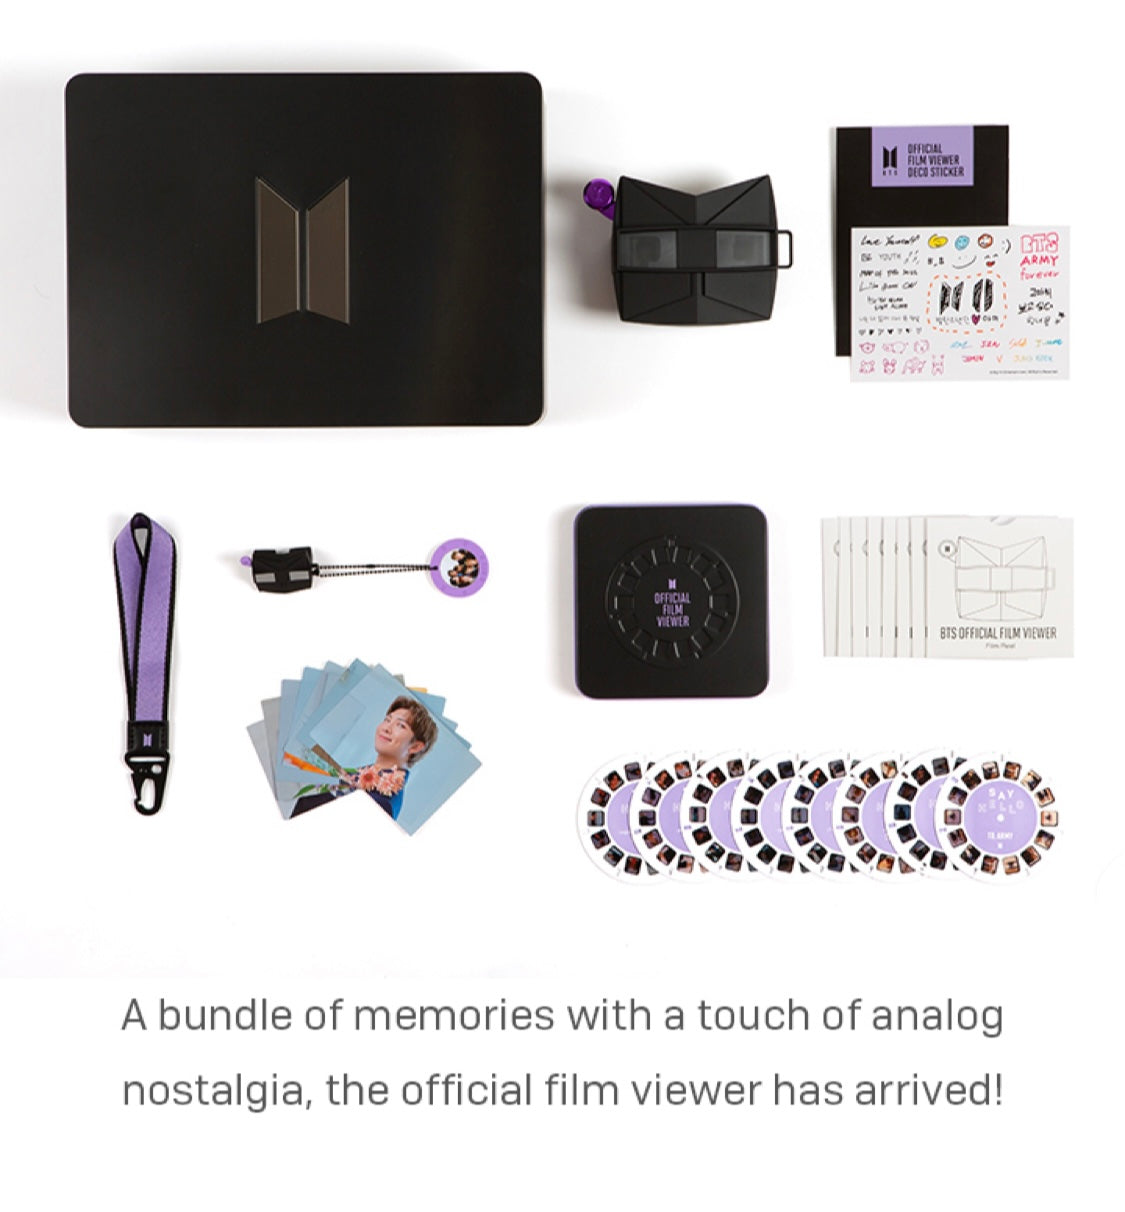 [BTS] Official Film Viewer Special Kit